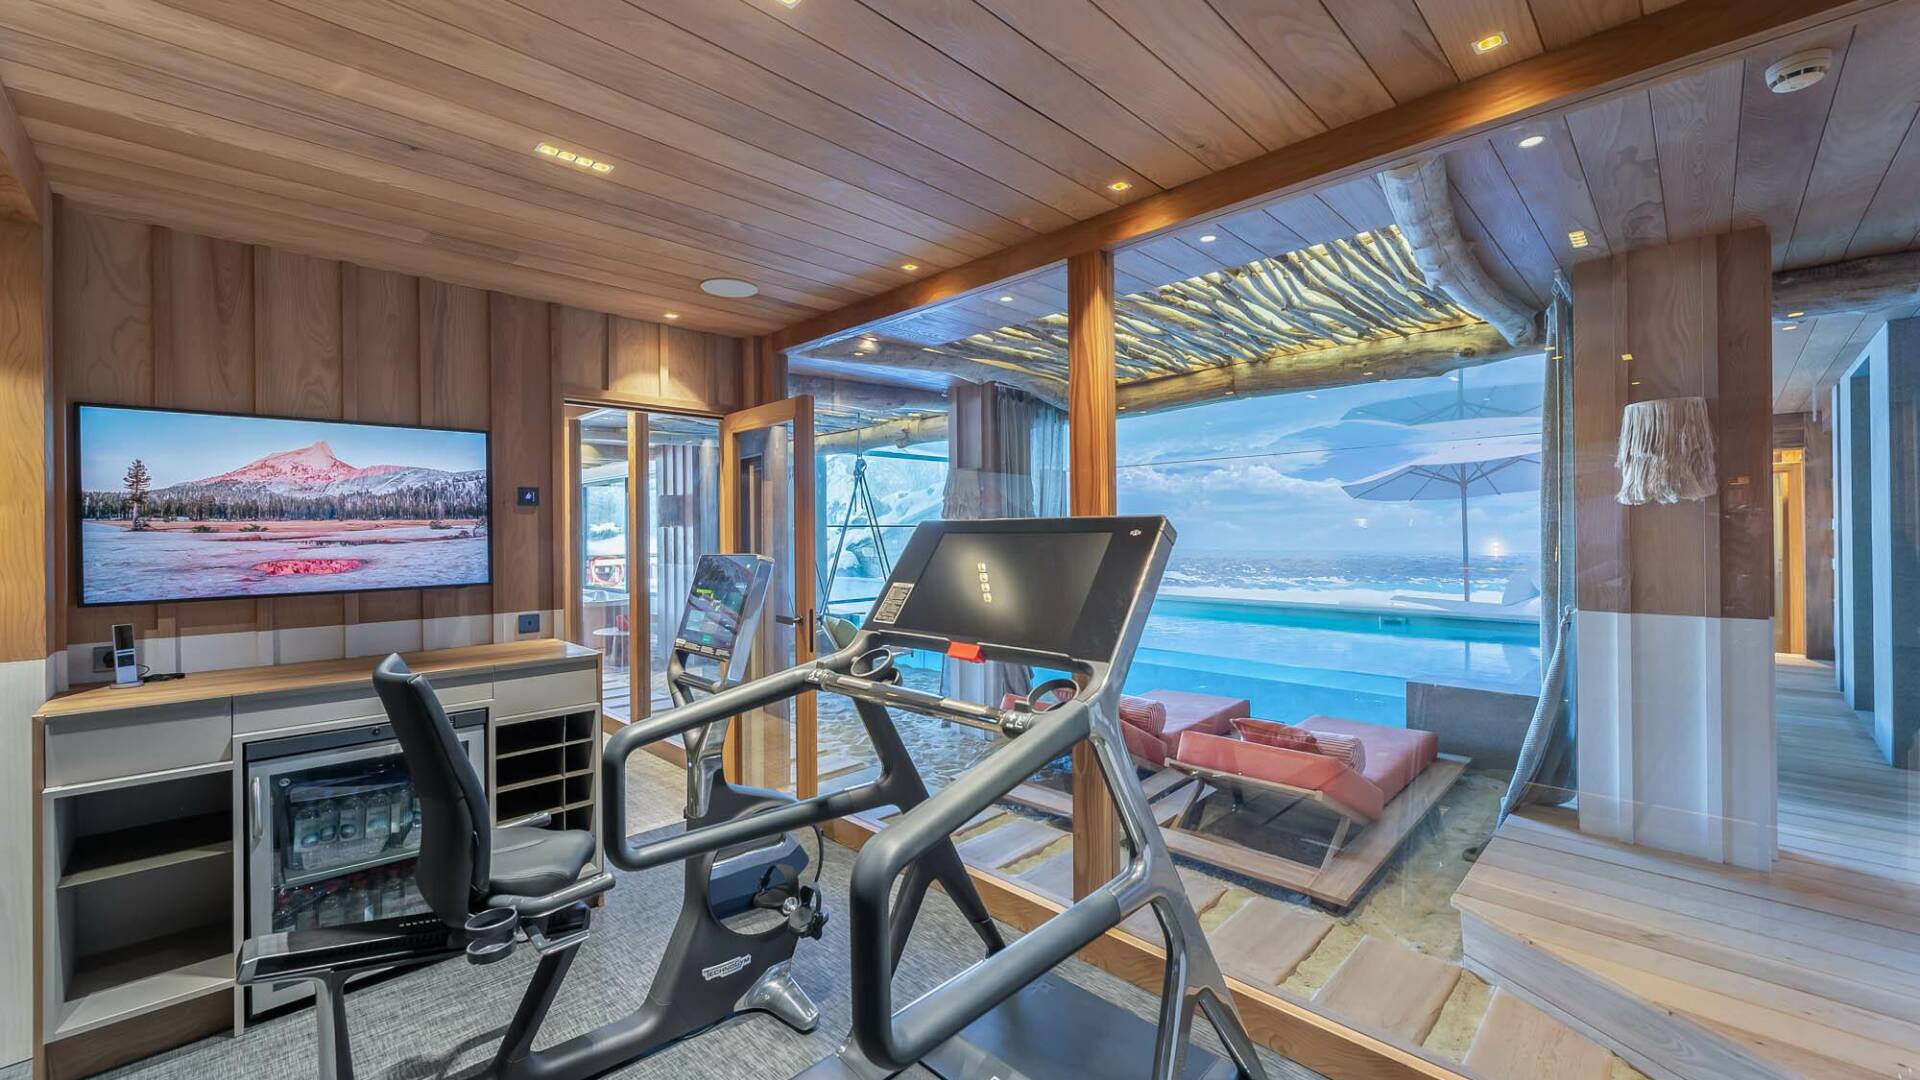 fully-equipped gym nearby indoor/outdoor heated pool